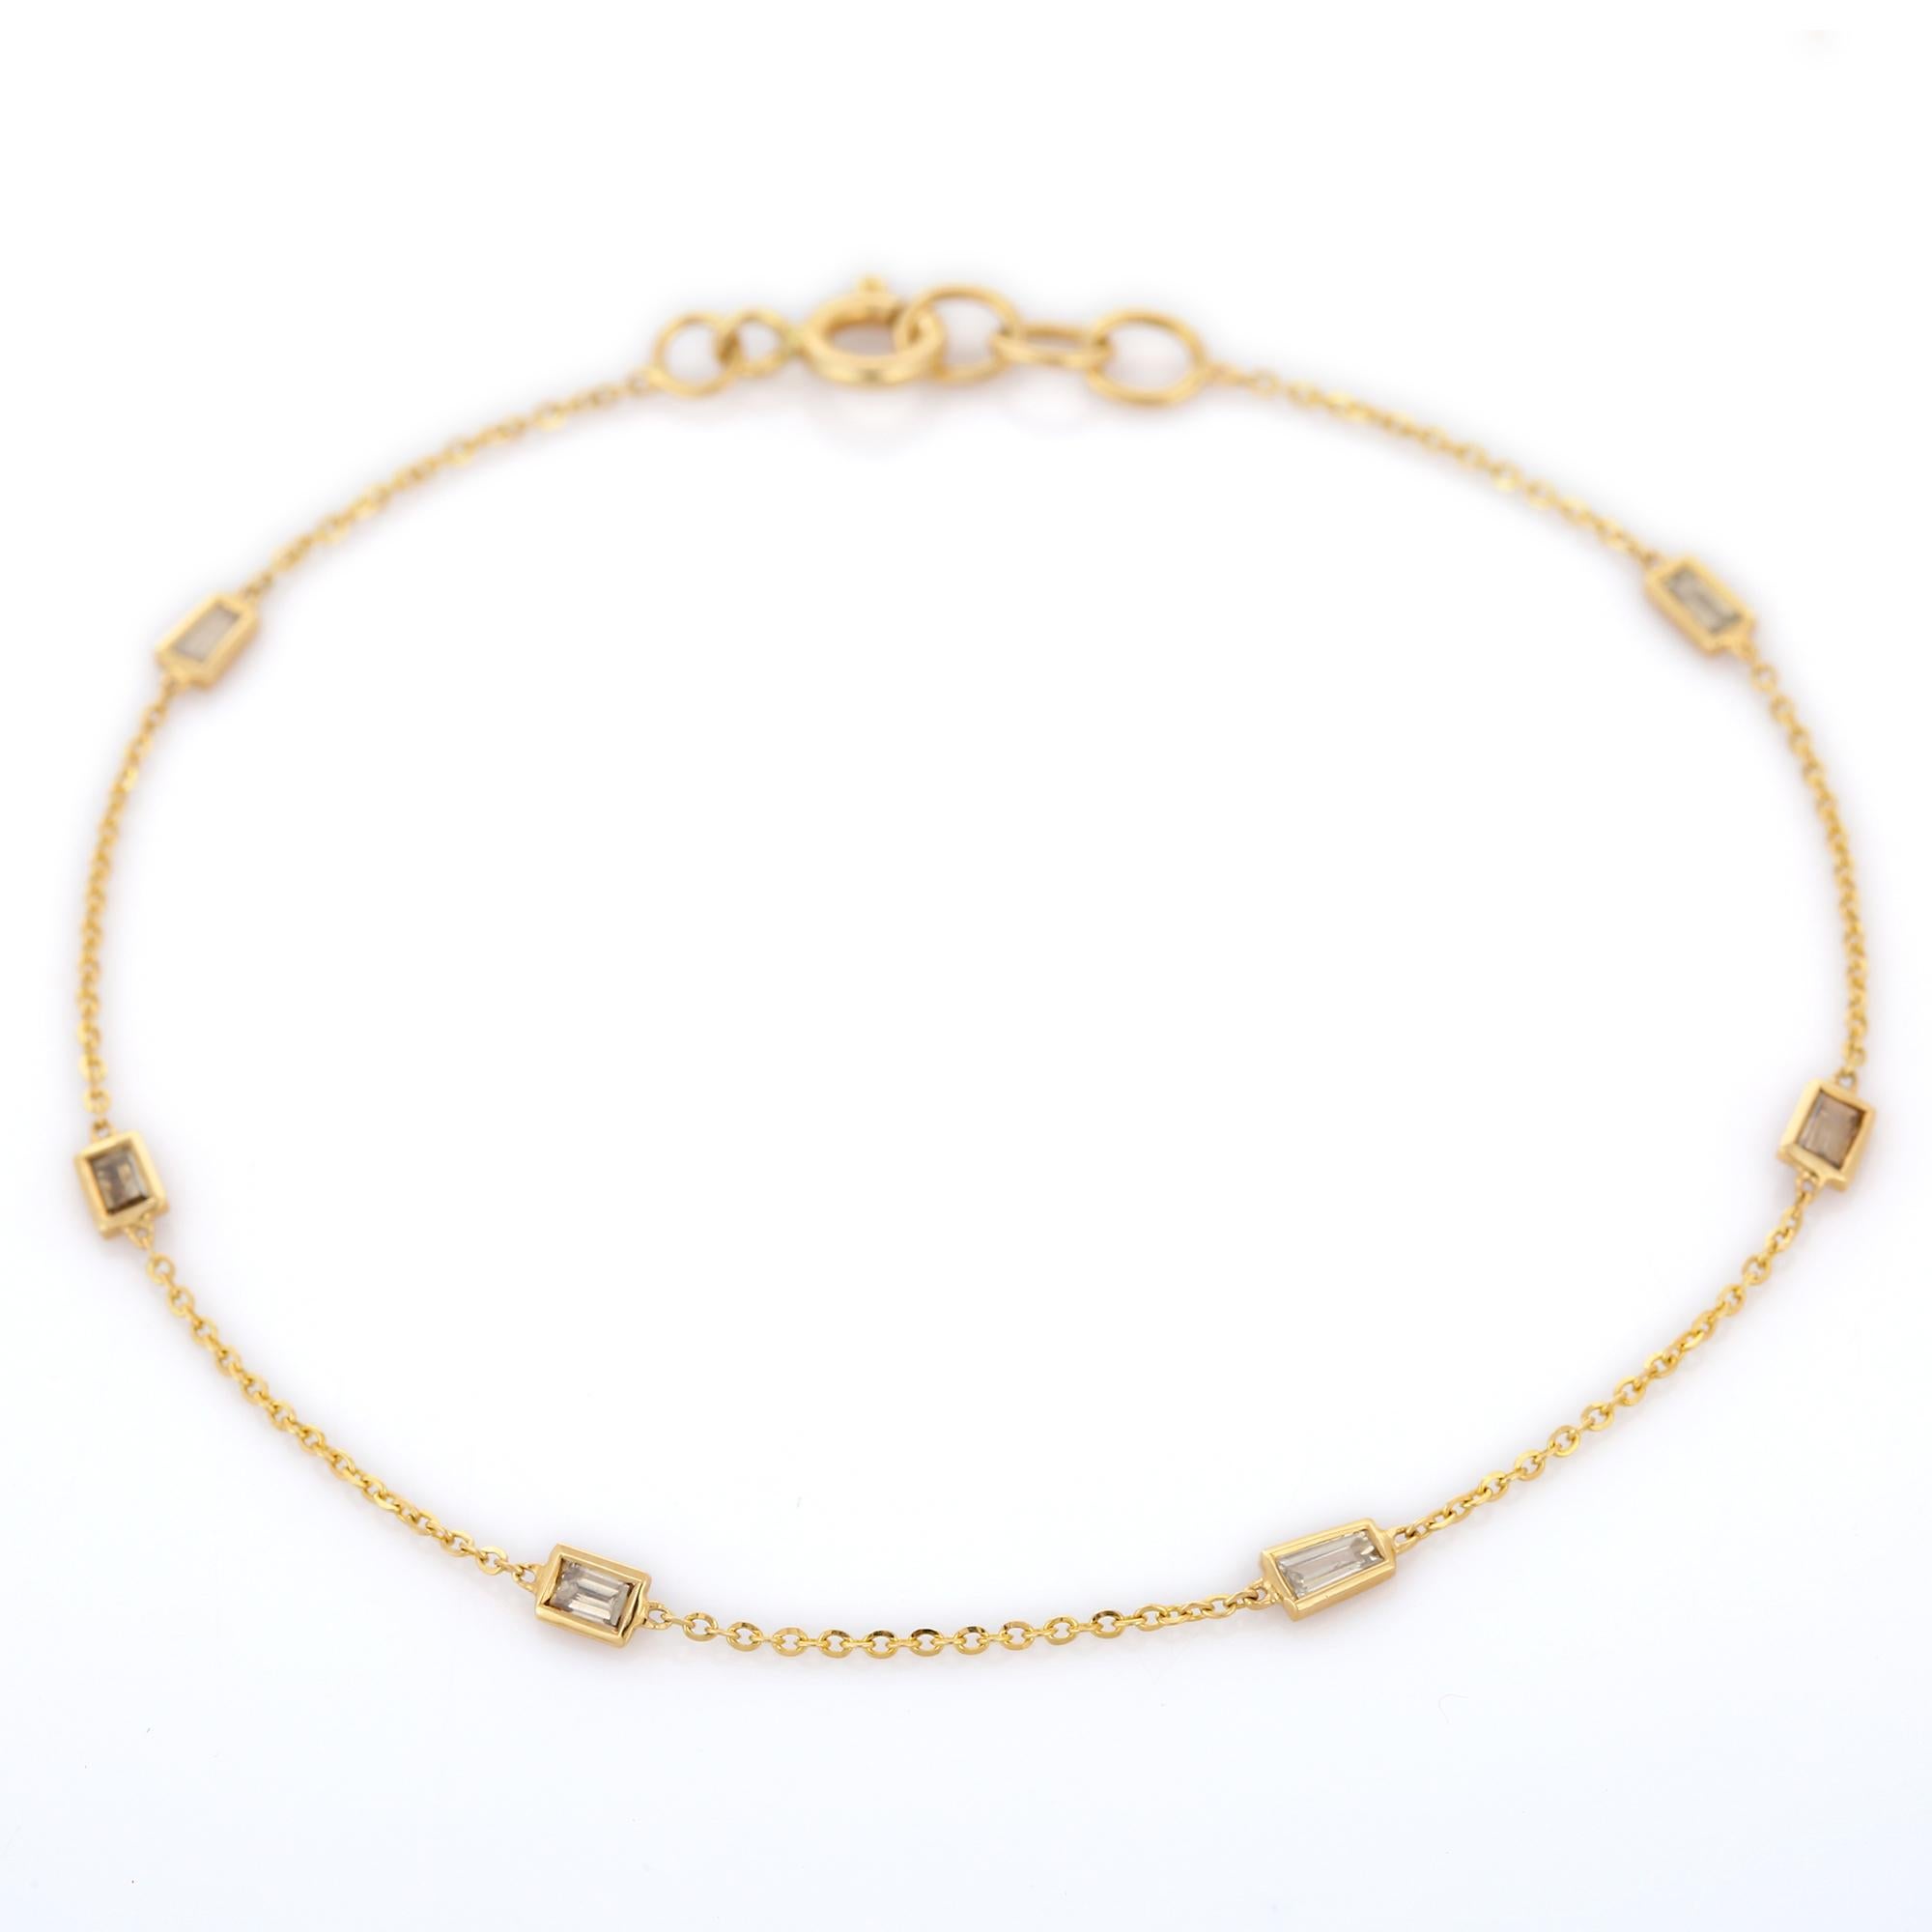 Bracelets are worn to enhance the look. Women love to look good. It is common to see a woman rocking a lovely gold bracelet on her wrist. A gold gemstone bracelet is the ultimate statement piece for every stylish woman.

Adorn your wrist with this